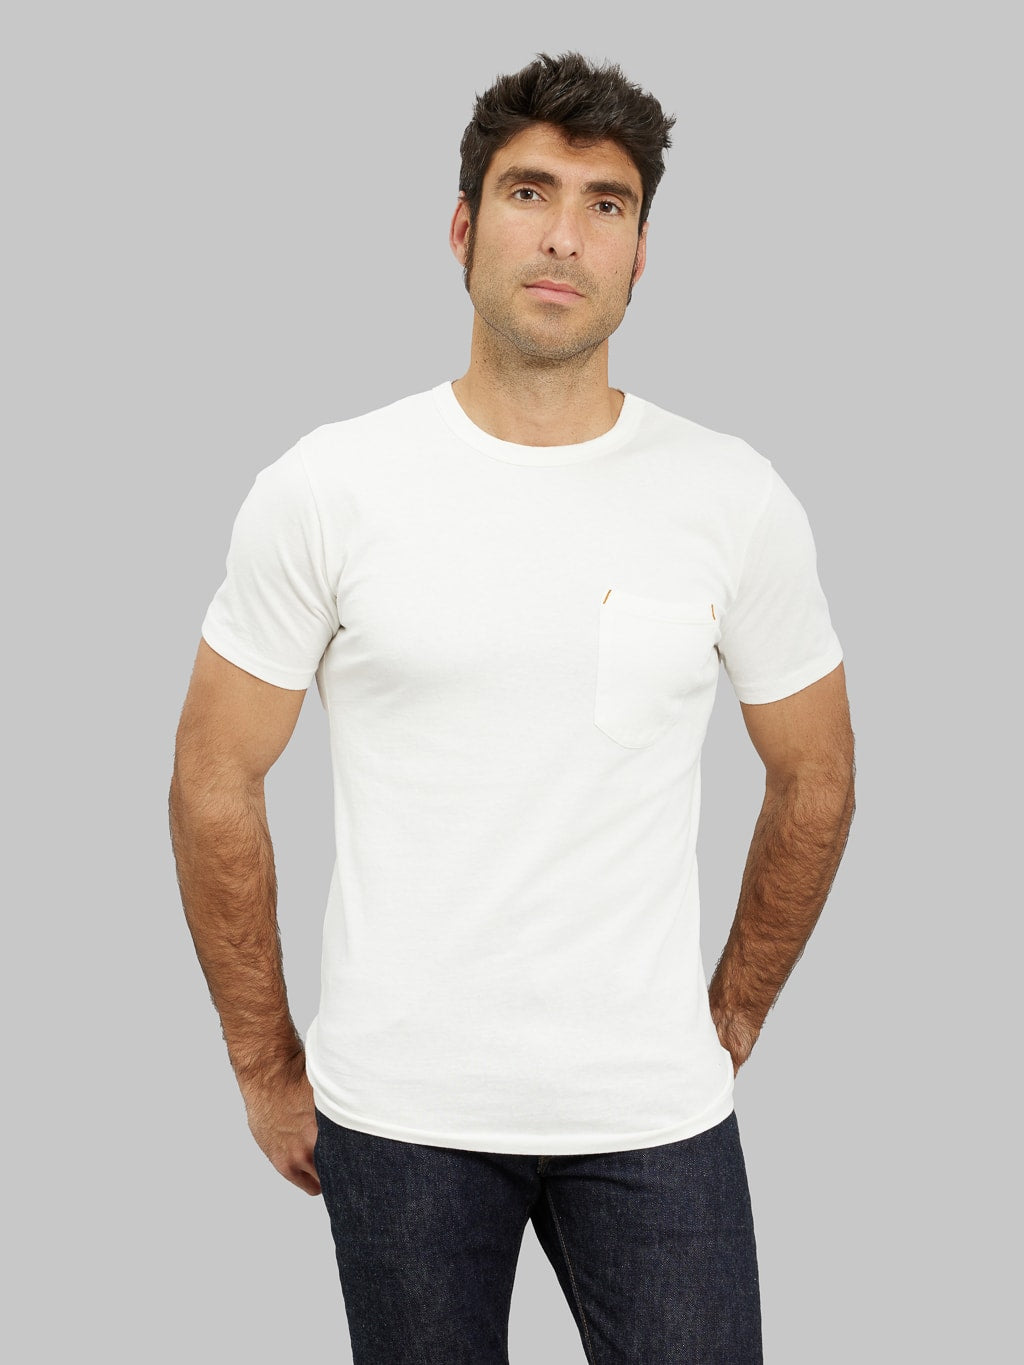 freenote cloth 9 ounce pocket t shirt white model front look